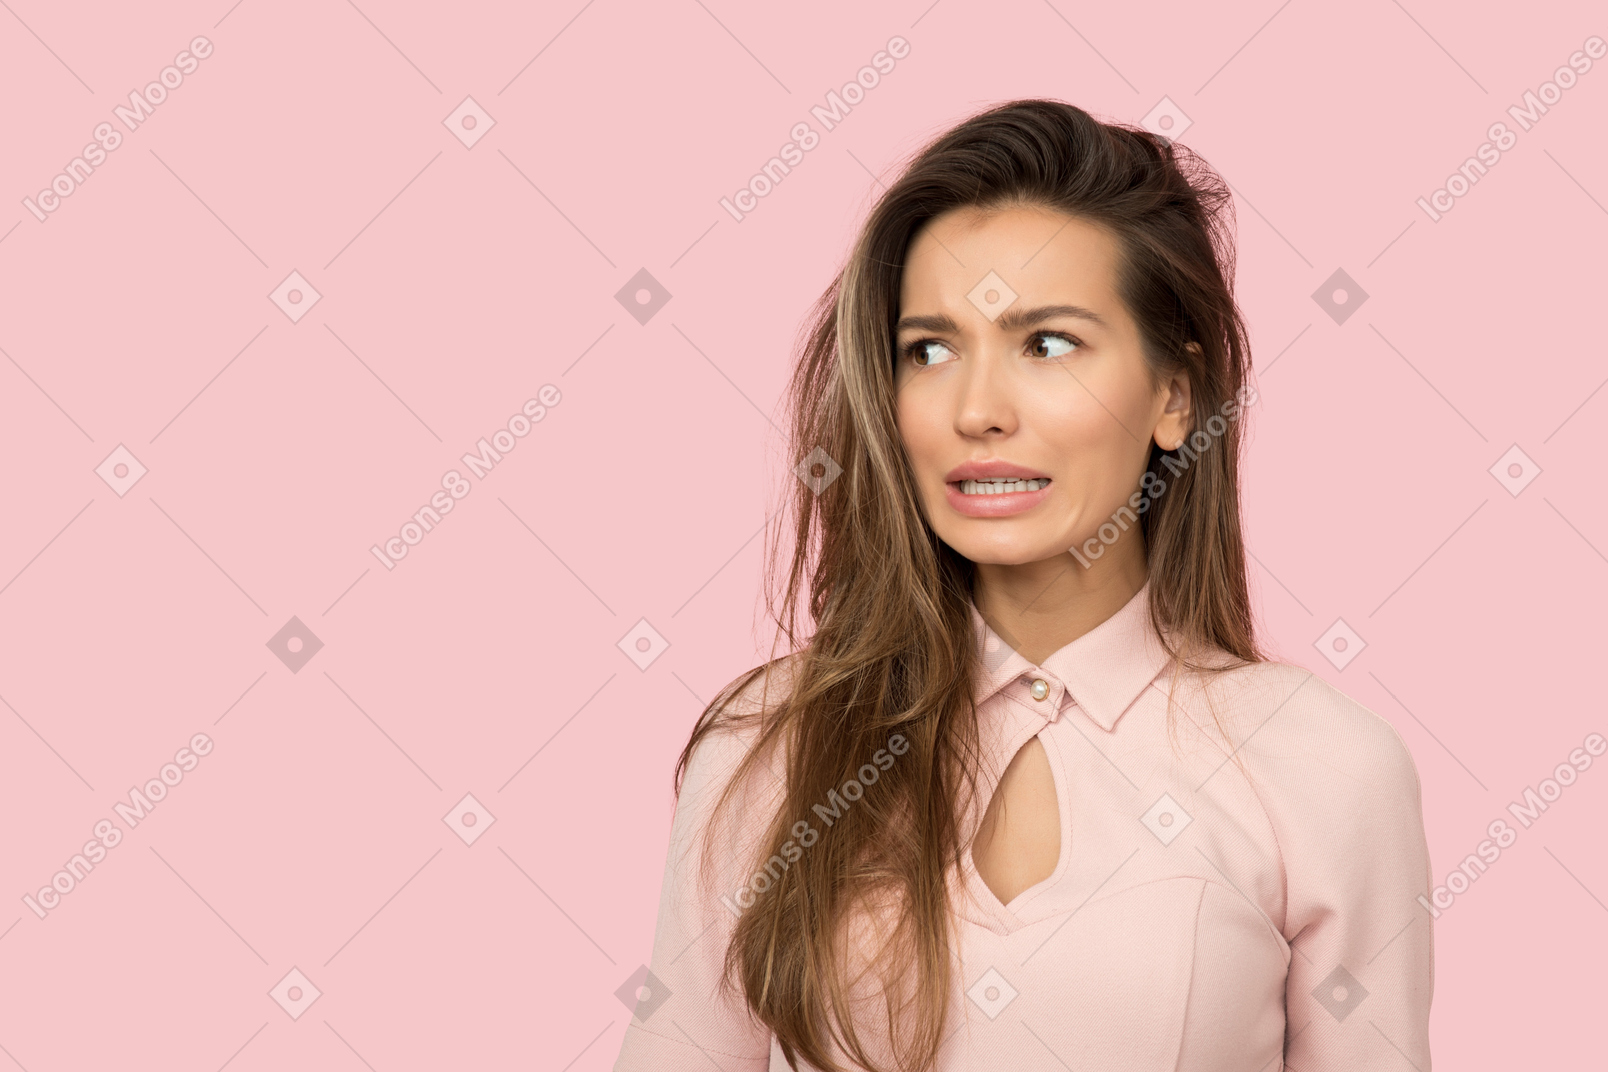 Young woman in pink looking uncomfortable